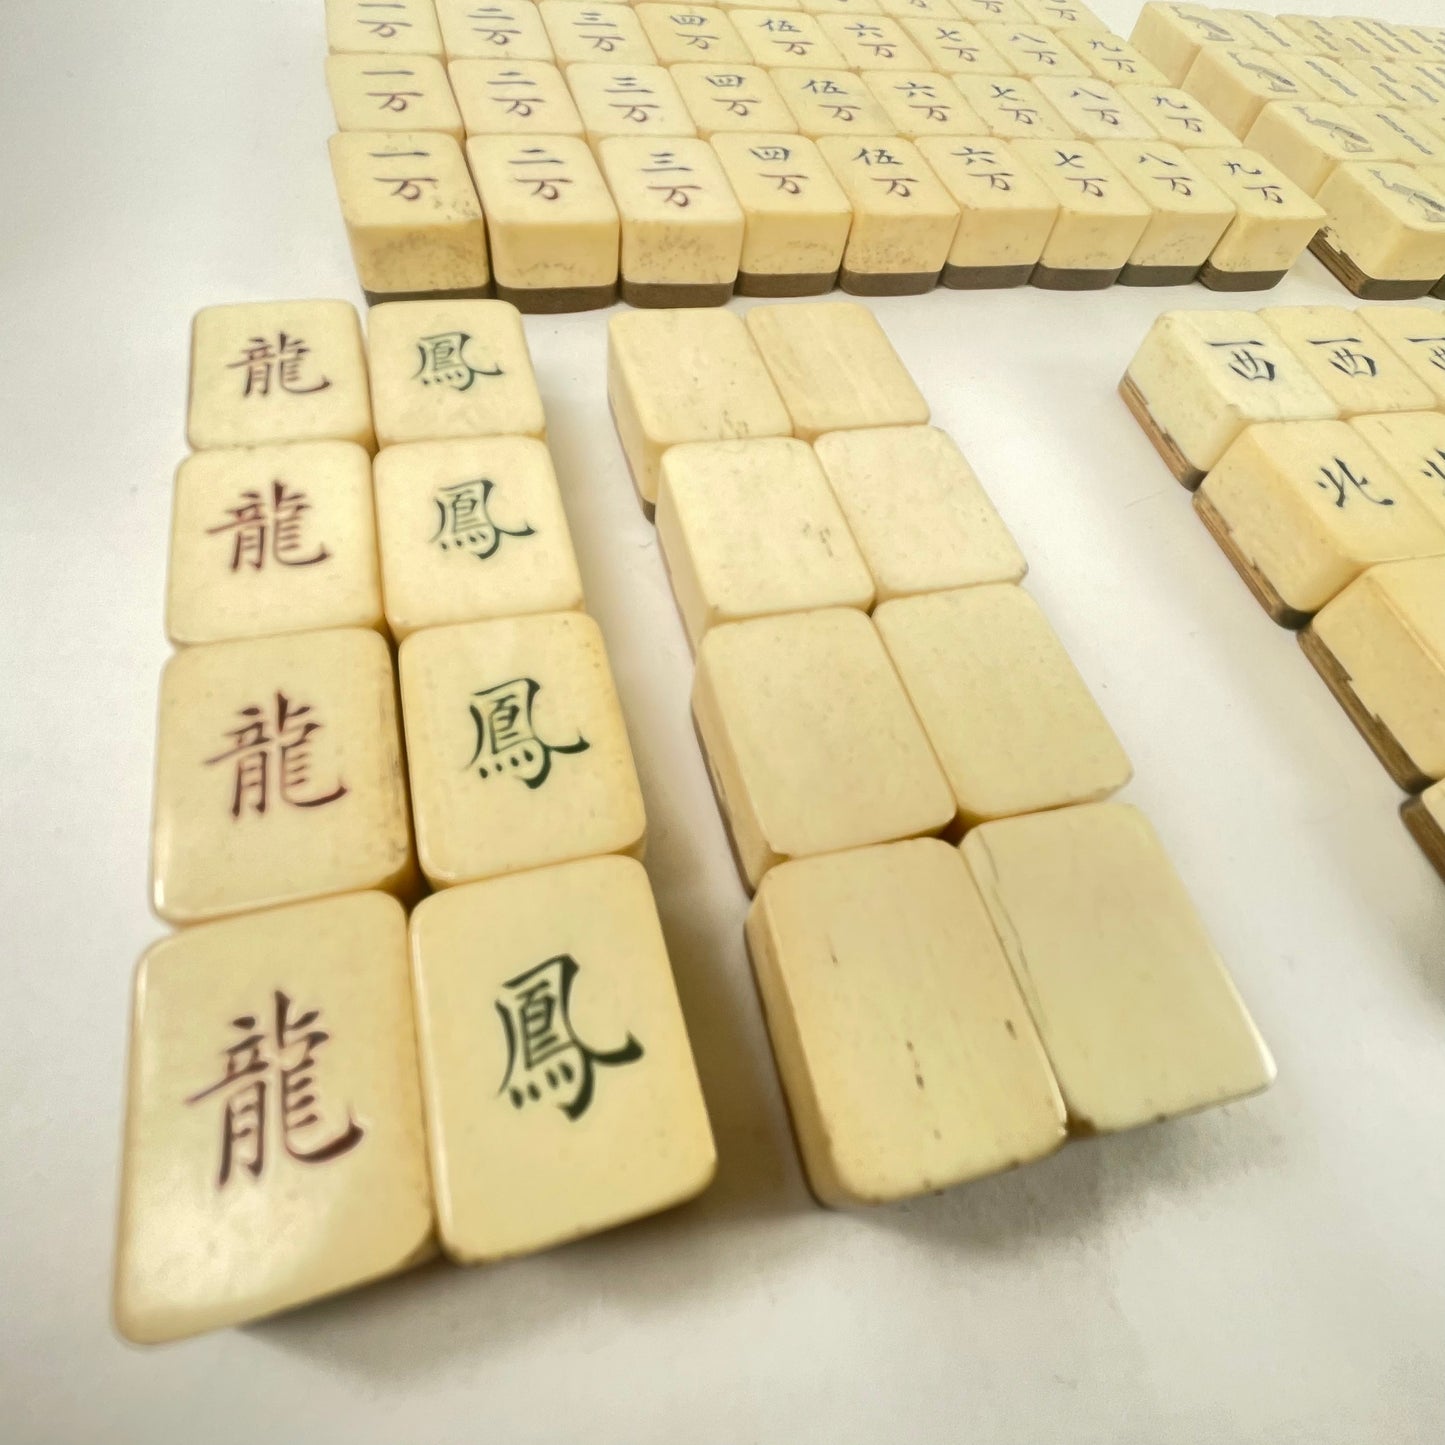 Antique Rare Chinese Mahjong Set (no English no Arabic Numerals) Small 2” x 2.5” Tiles Special Tiles, Sage, Cat, Mouse & Flowers